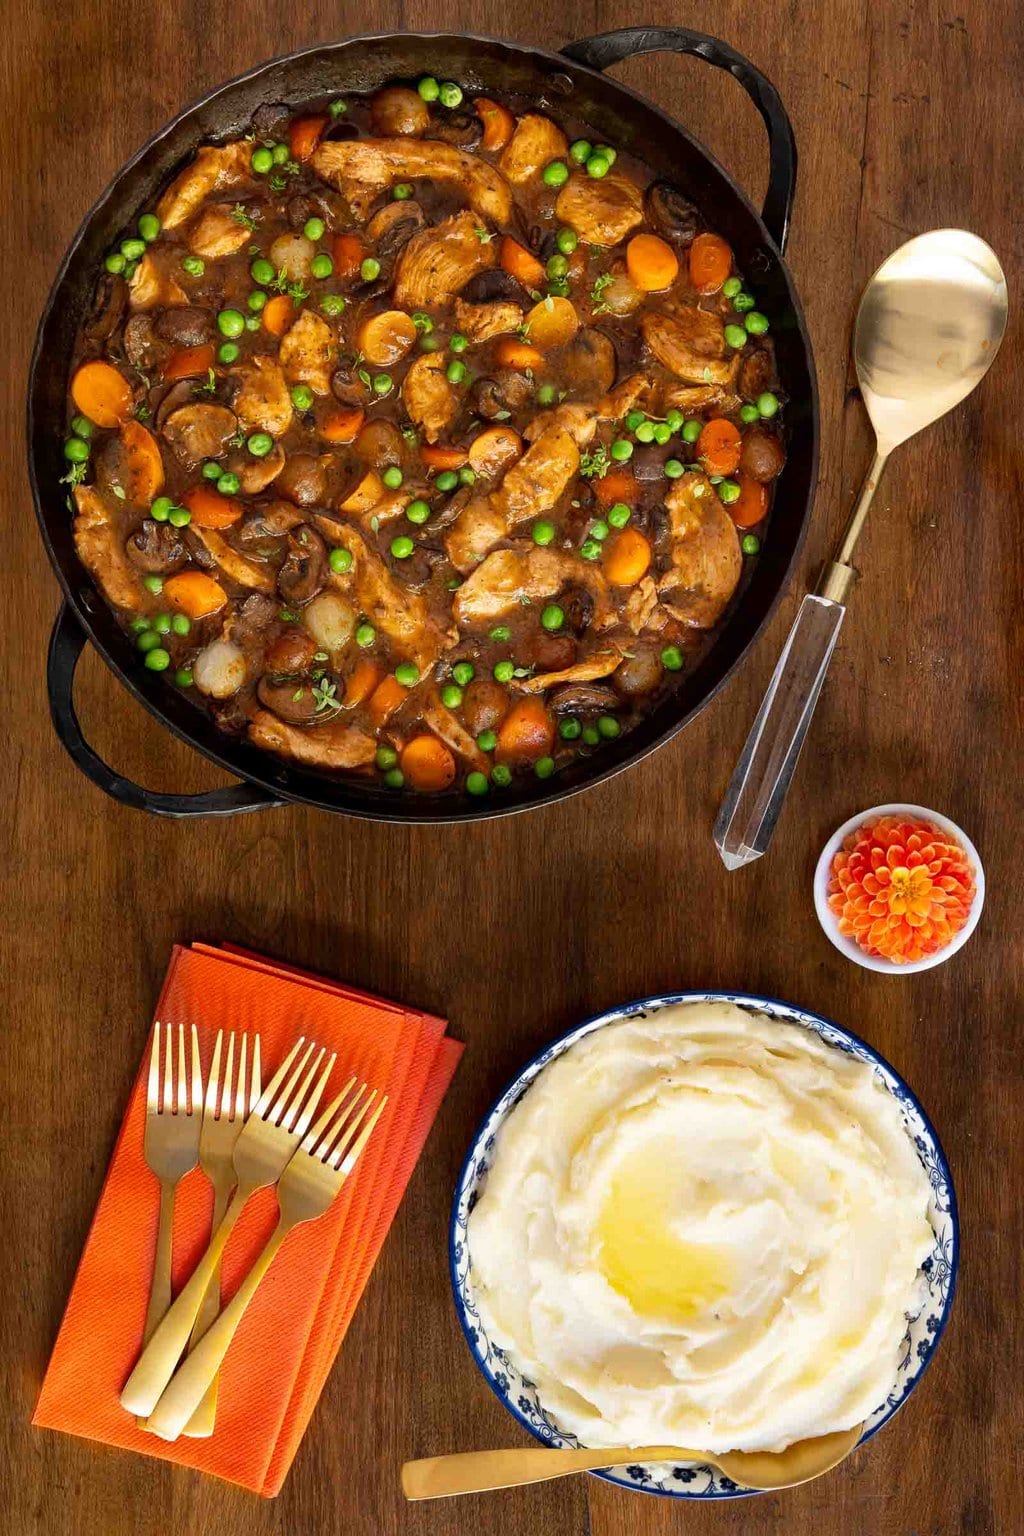 Vertical overhead photo of a cast iron skillet of Easy, Make-Ahead Parisian Coq au Vin on a wood table with a side of mashed potatoes.